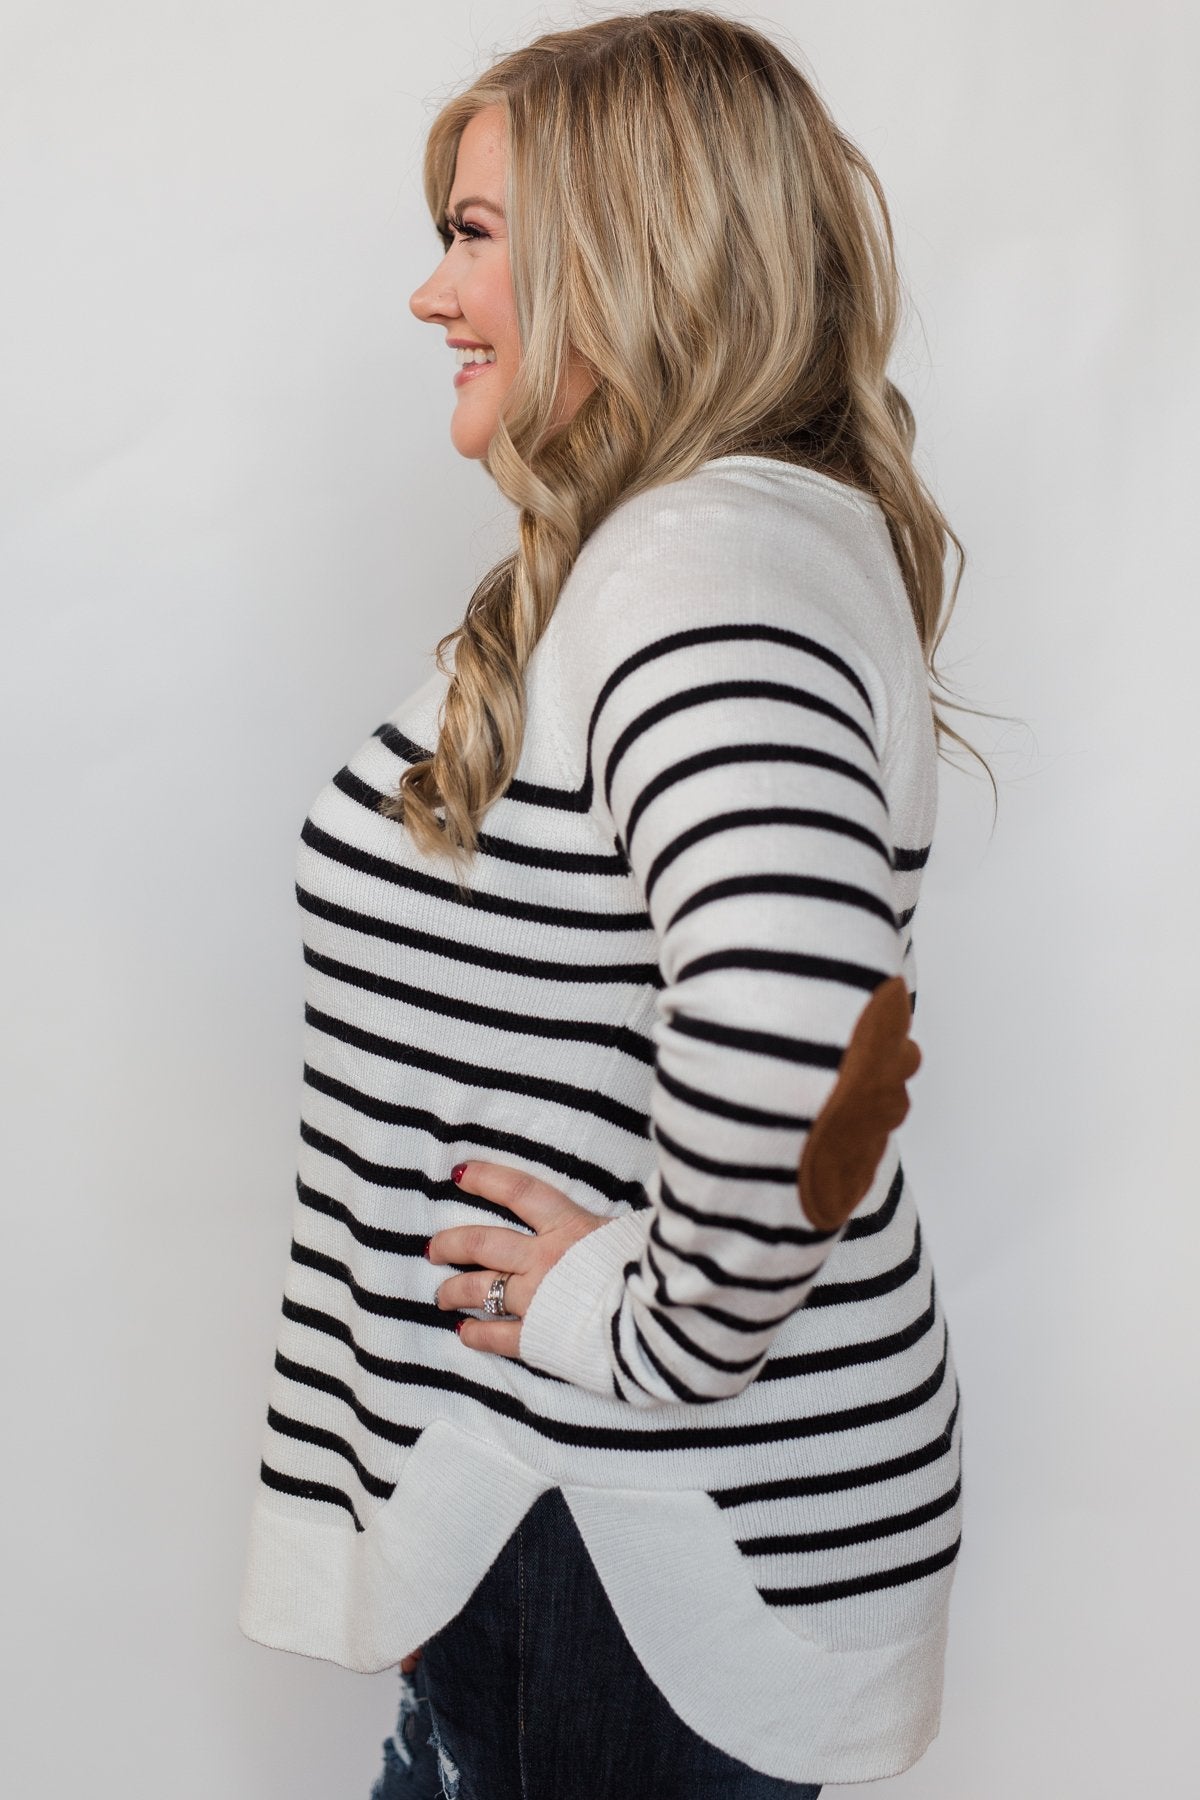 Cozy in Stripes Elbow Patch Sweater - Black & White – The Pulse